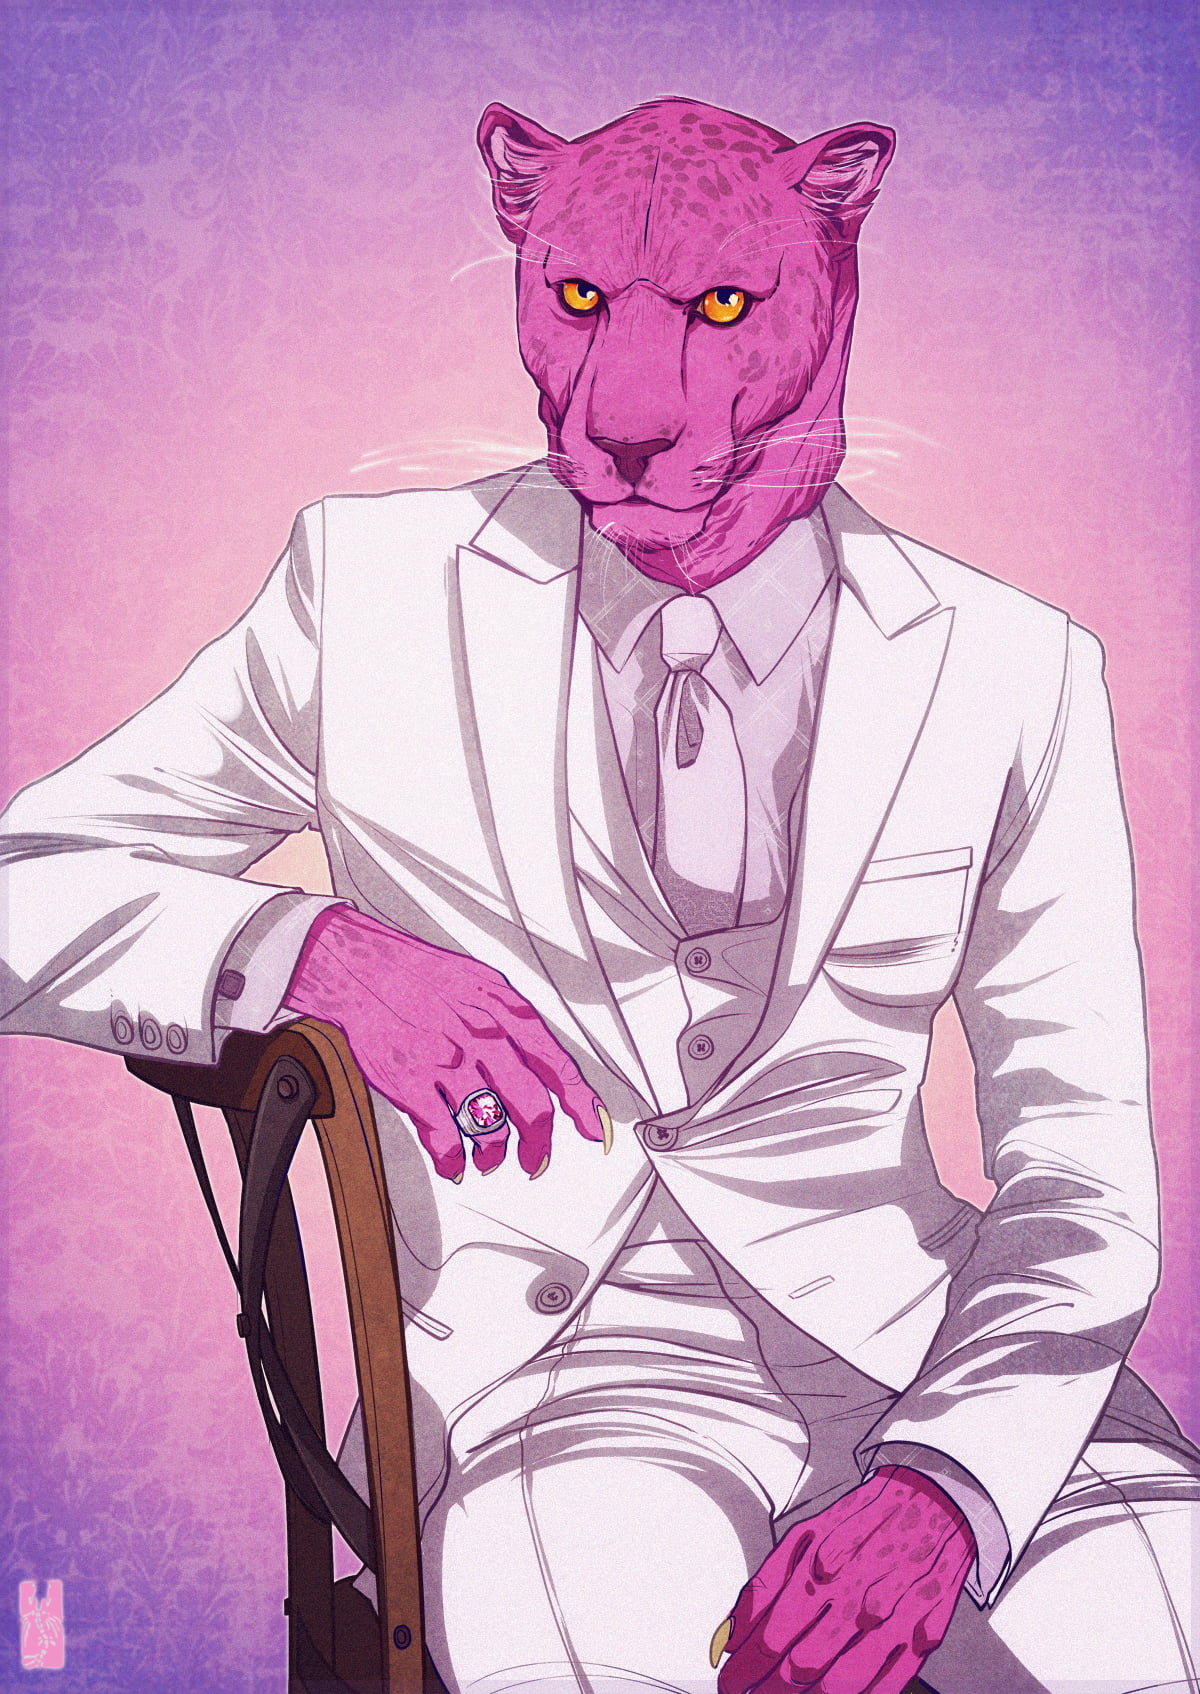 Purple Cat In White Suit Animated Illustration Hd Wallpaper Images, Photos, Reviews